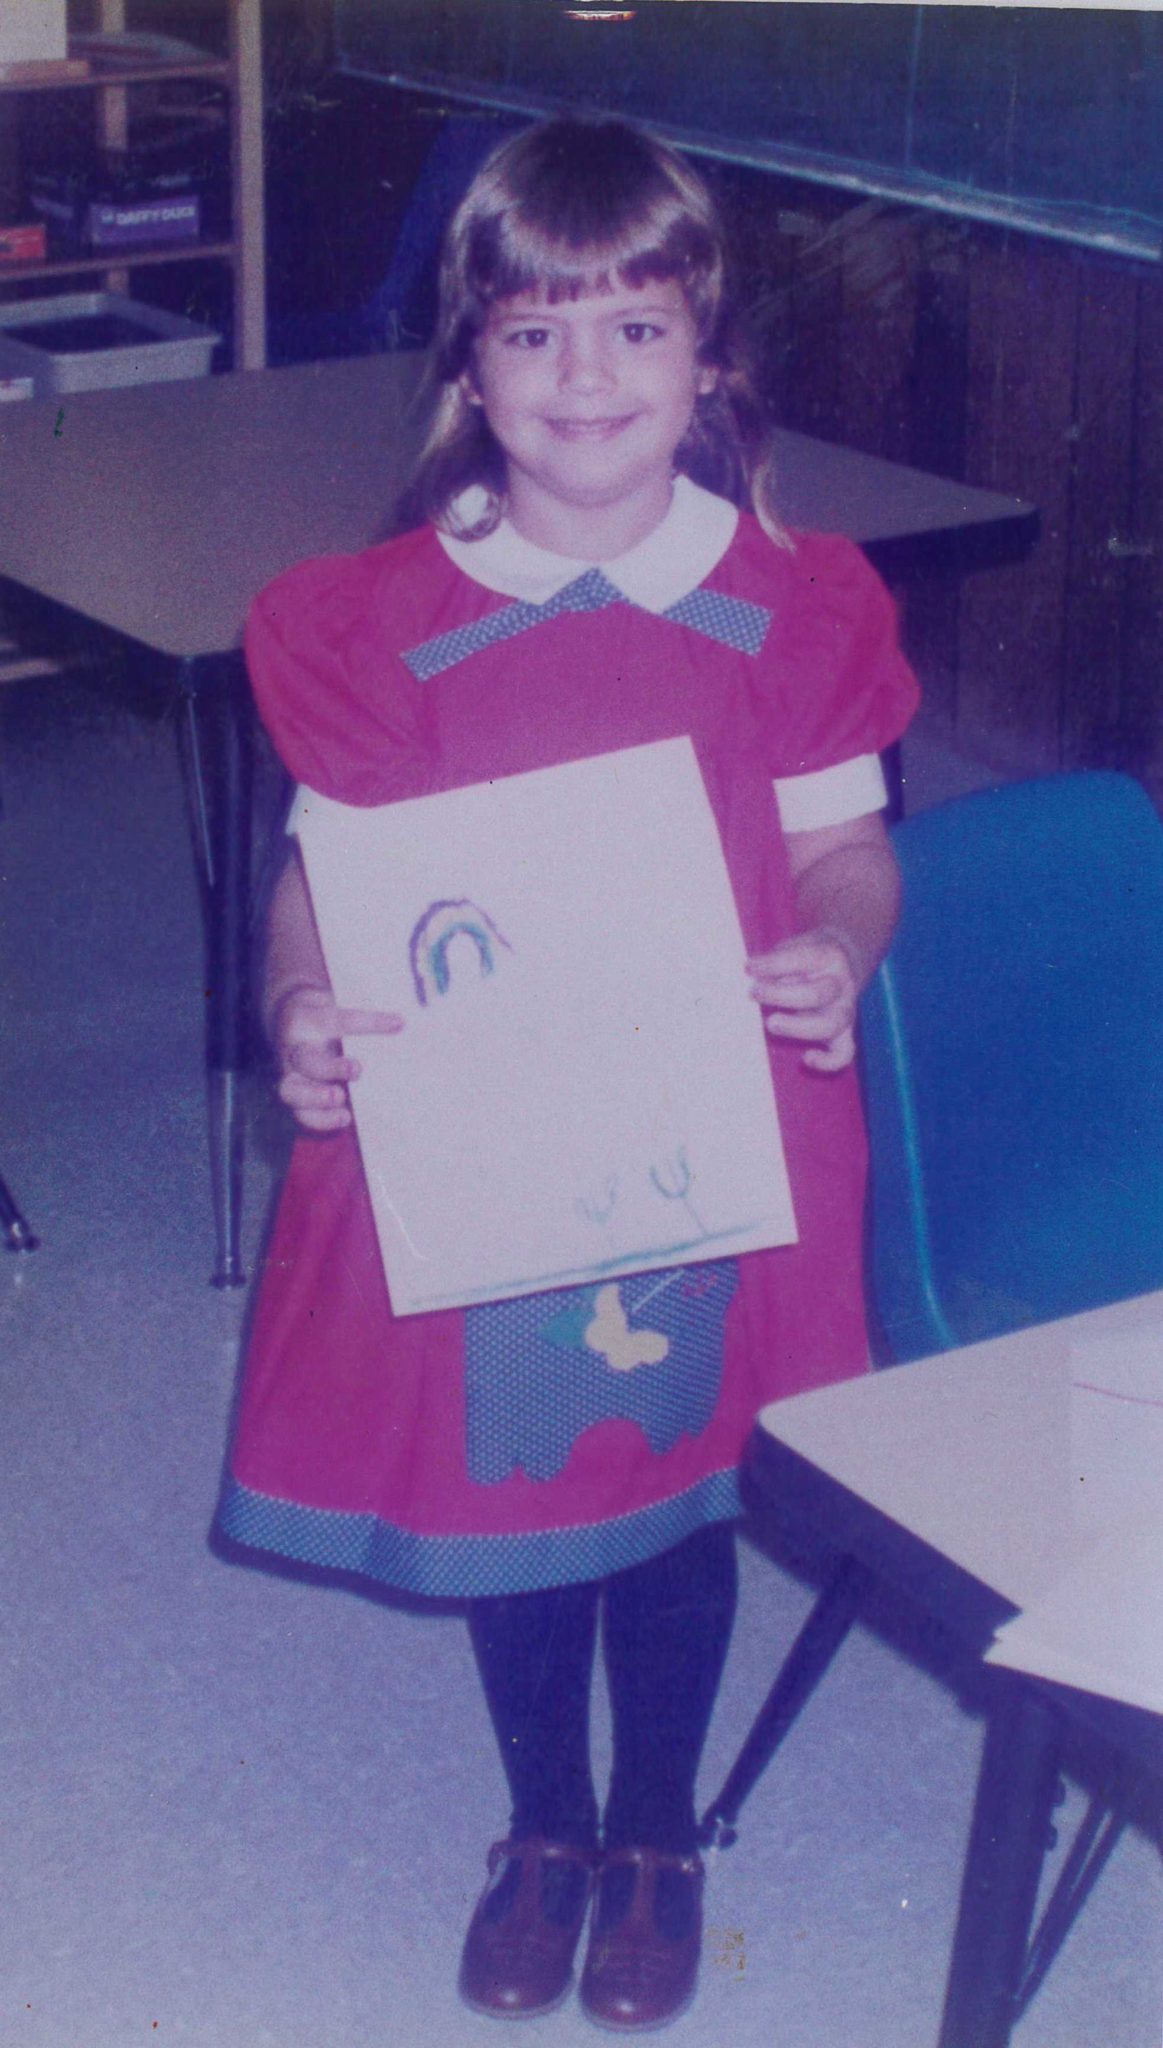 Occupational Therapist Nicole as a young girl, wearing a red dress showing her picture in a classroom